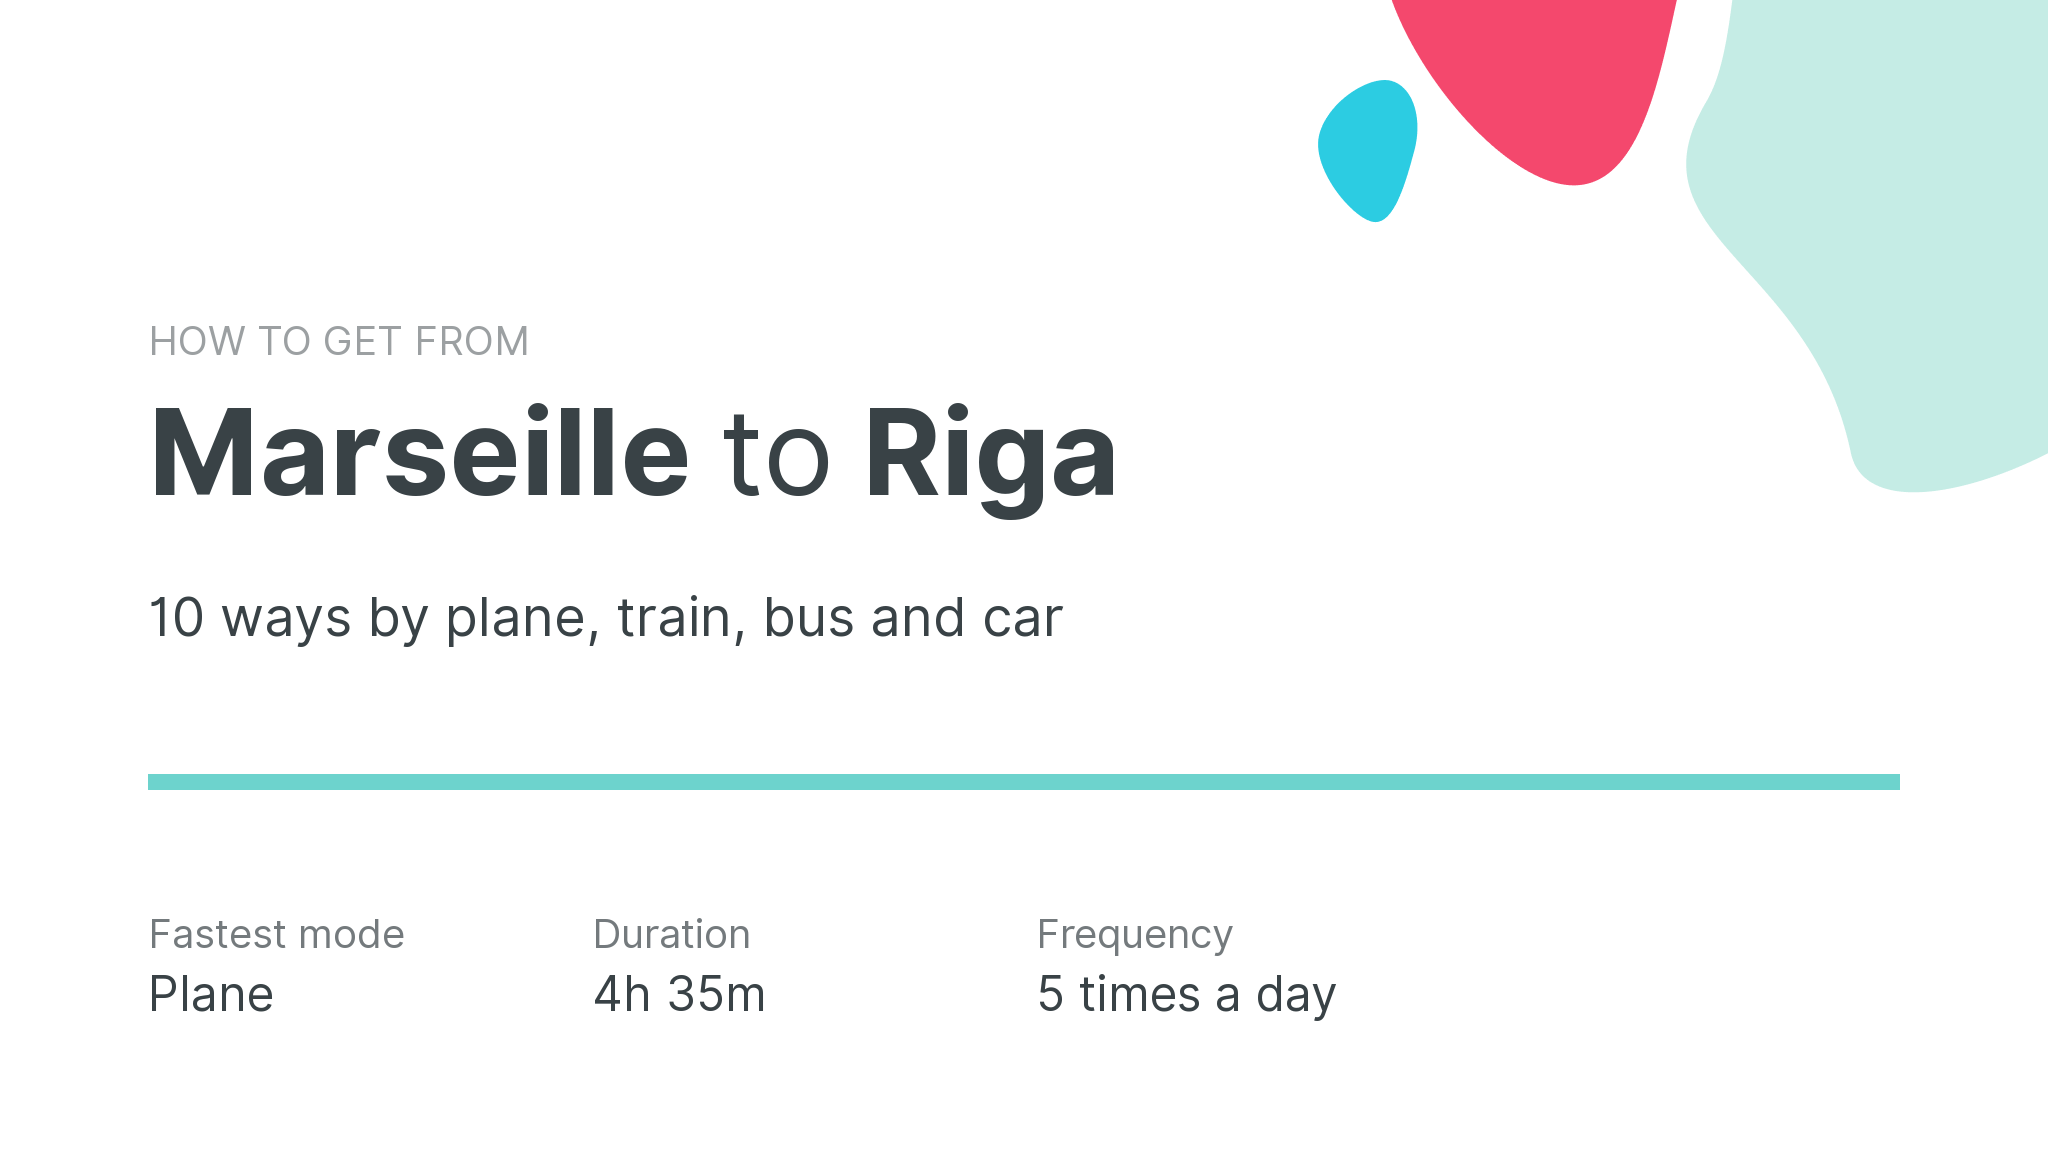 How do I get from Marseille to Riga